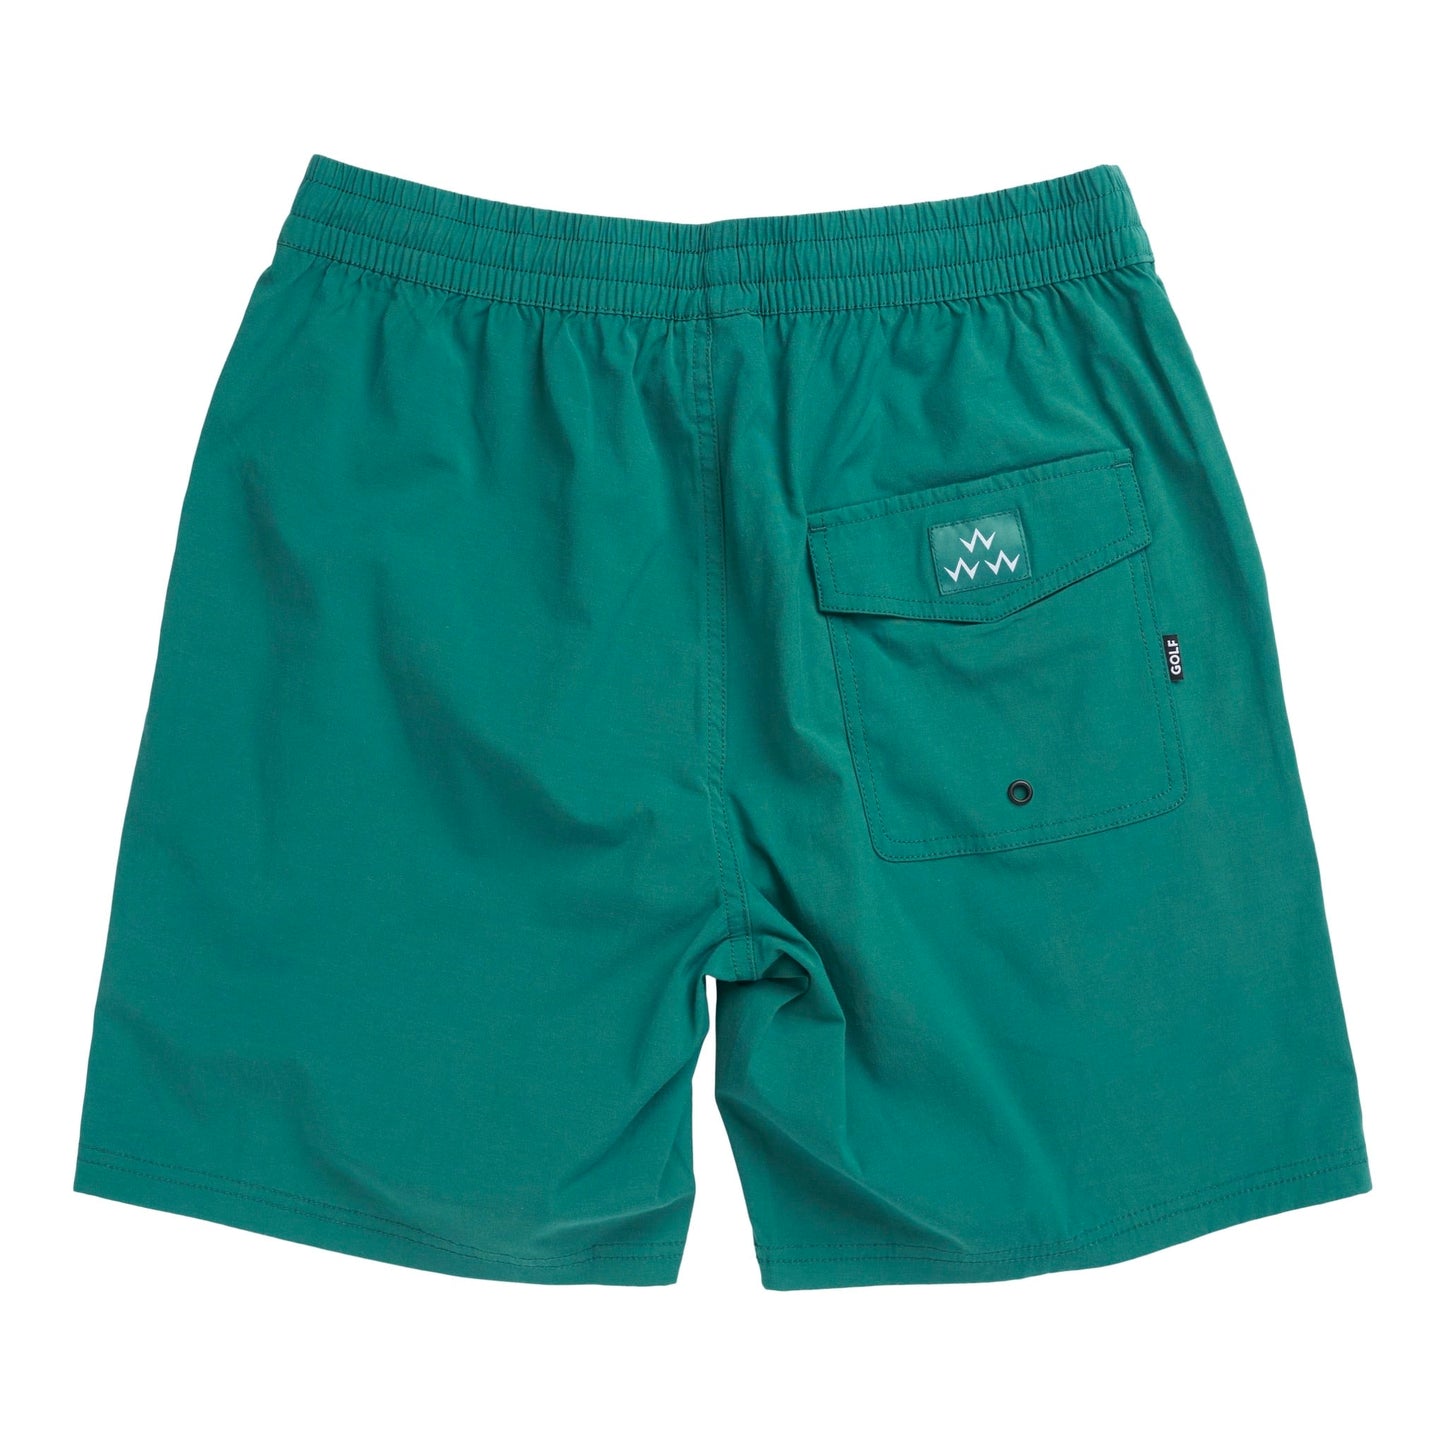 On The Green Shorts